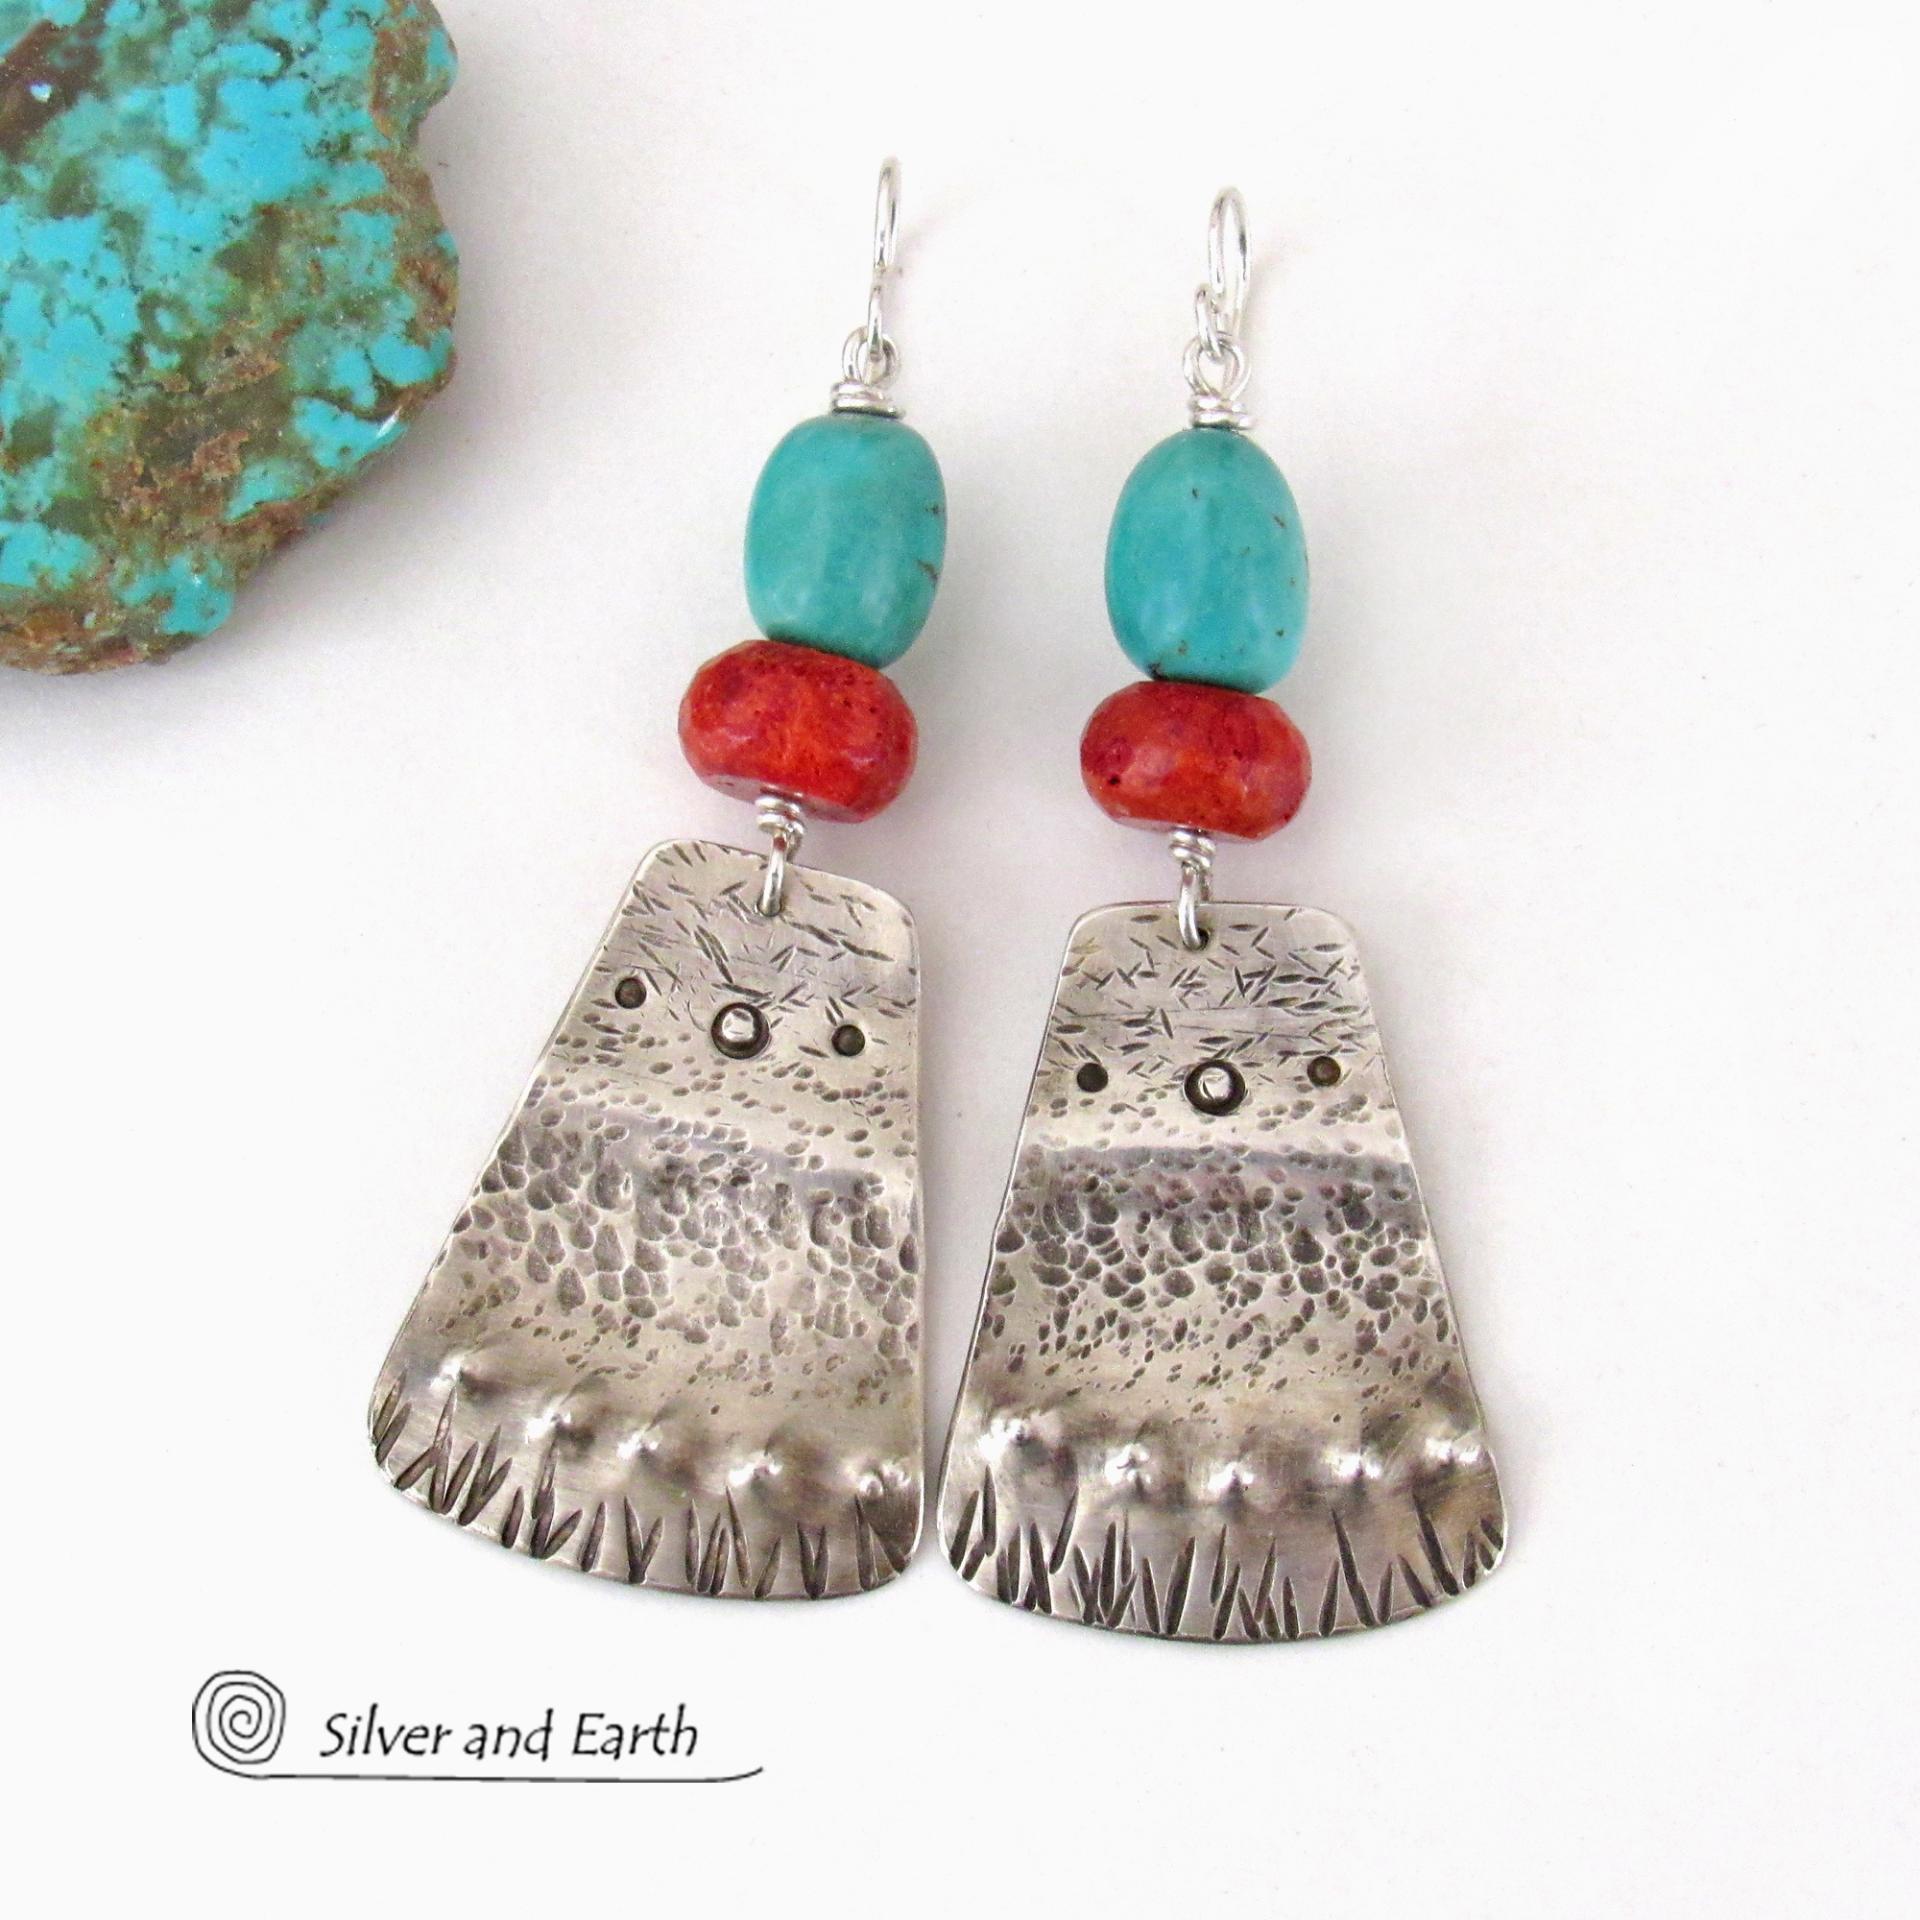 Sterling Silver and Turquoise Earrings with Red Coral - Artisan Handcrafted One of a Kind Southwest Style Jewelry